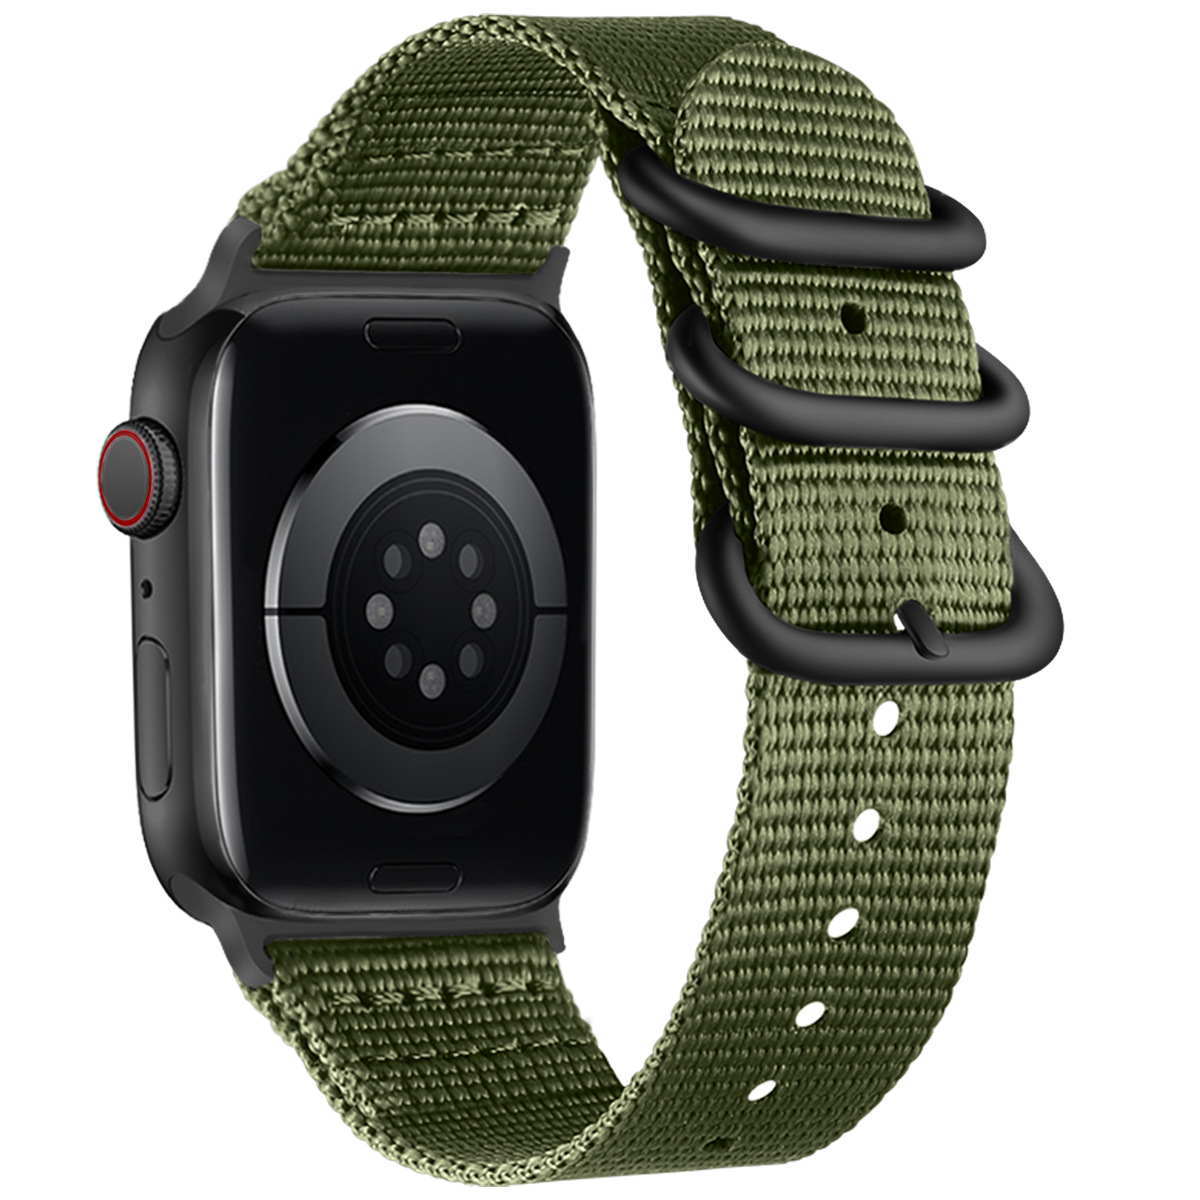 Suitable for Apple Watch AppleWatch Nylon Woven Iwatch5678 Three-Ring Buckle Two-Section NATO Adjustable